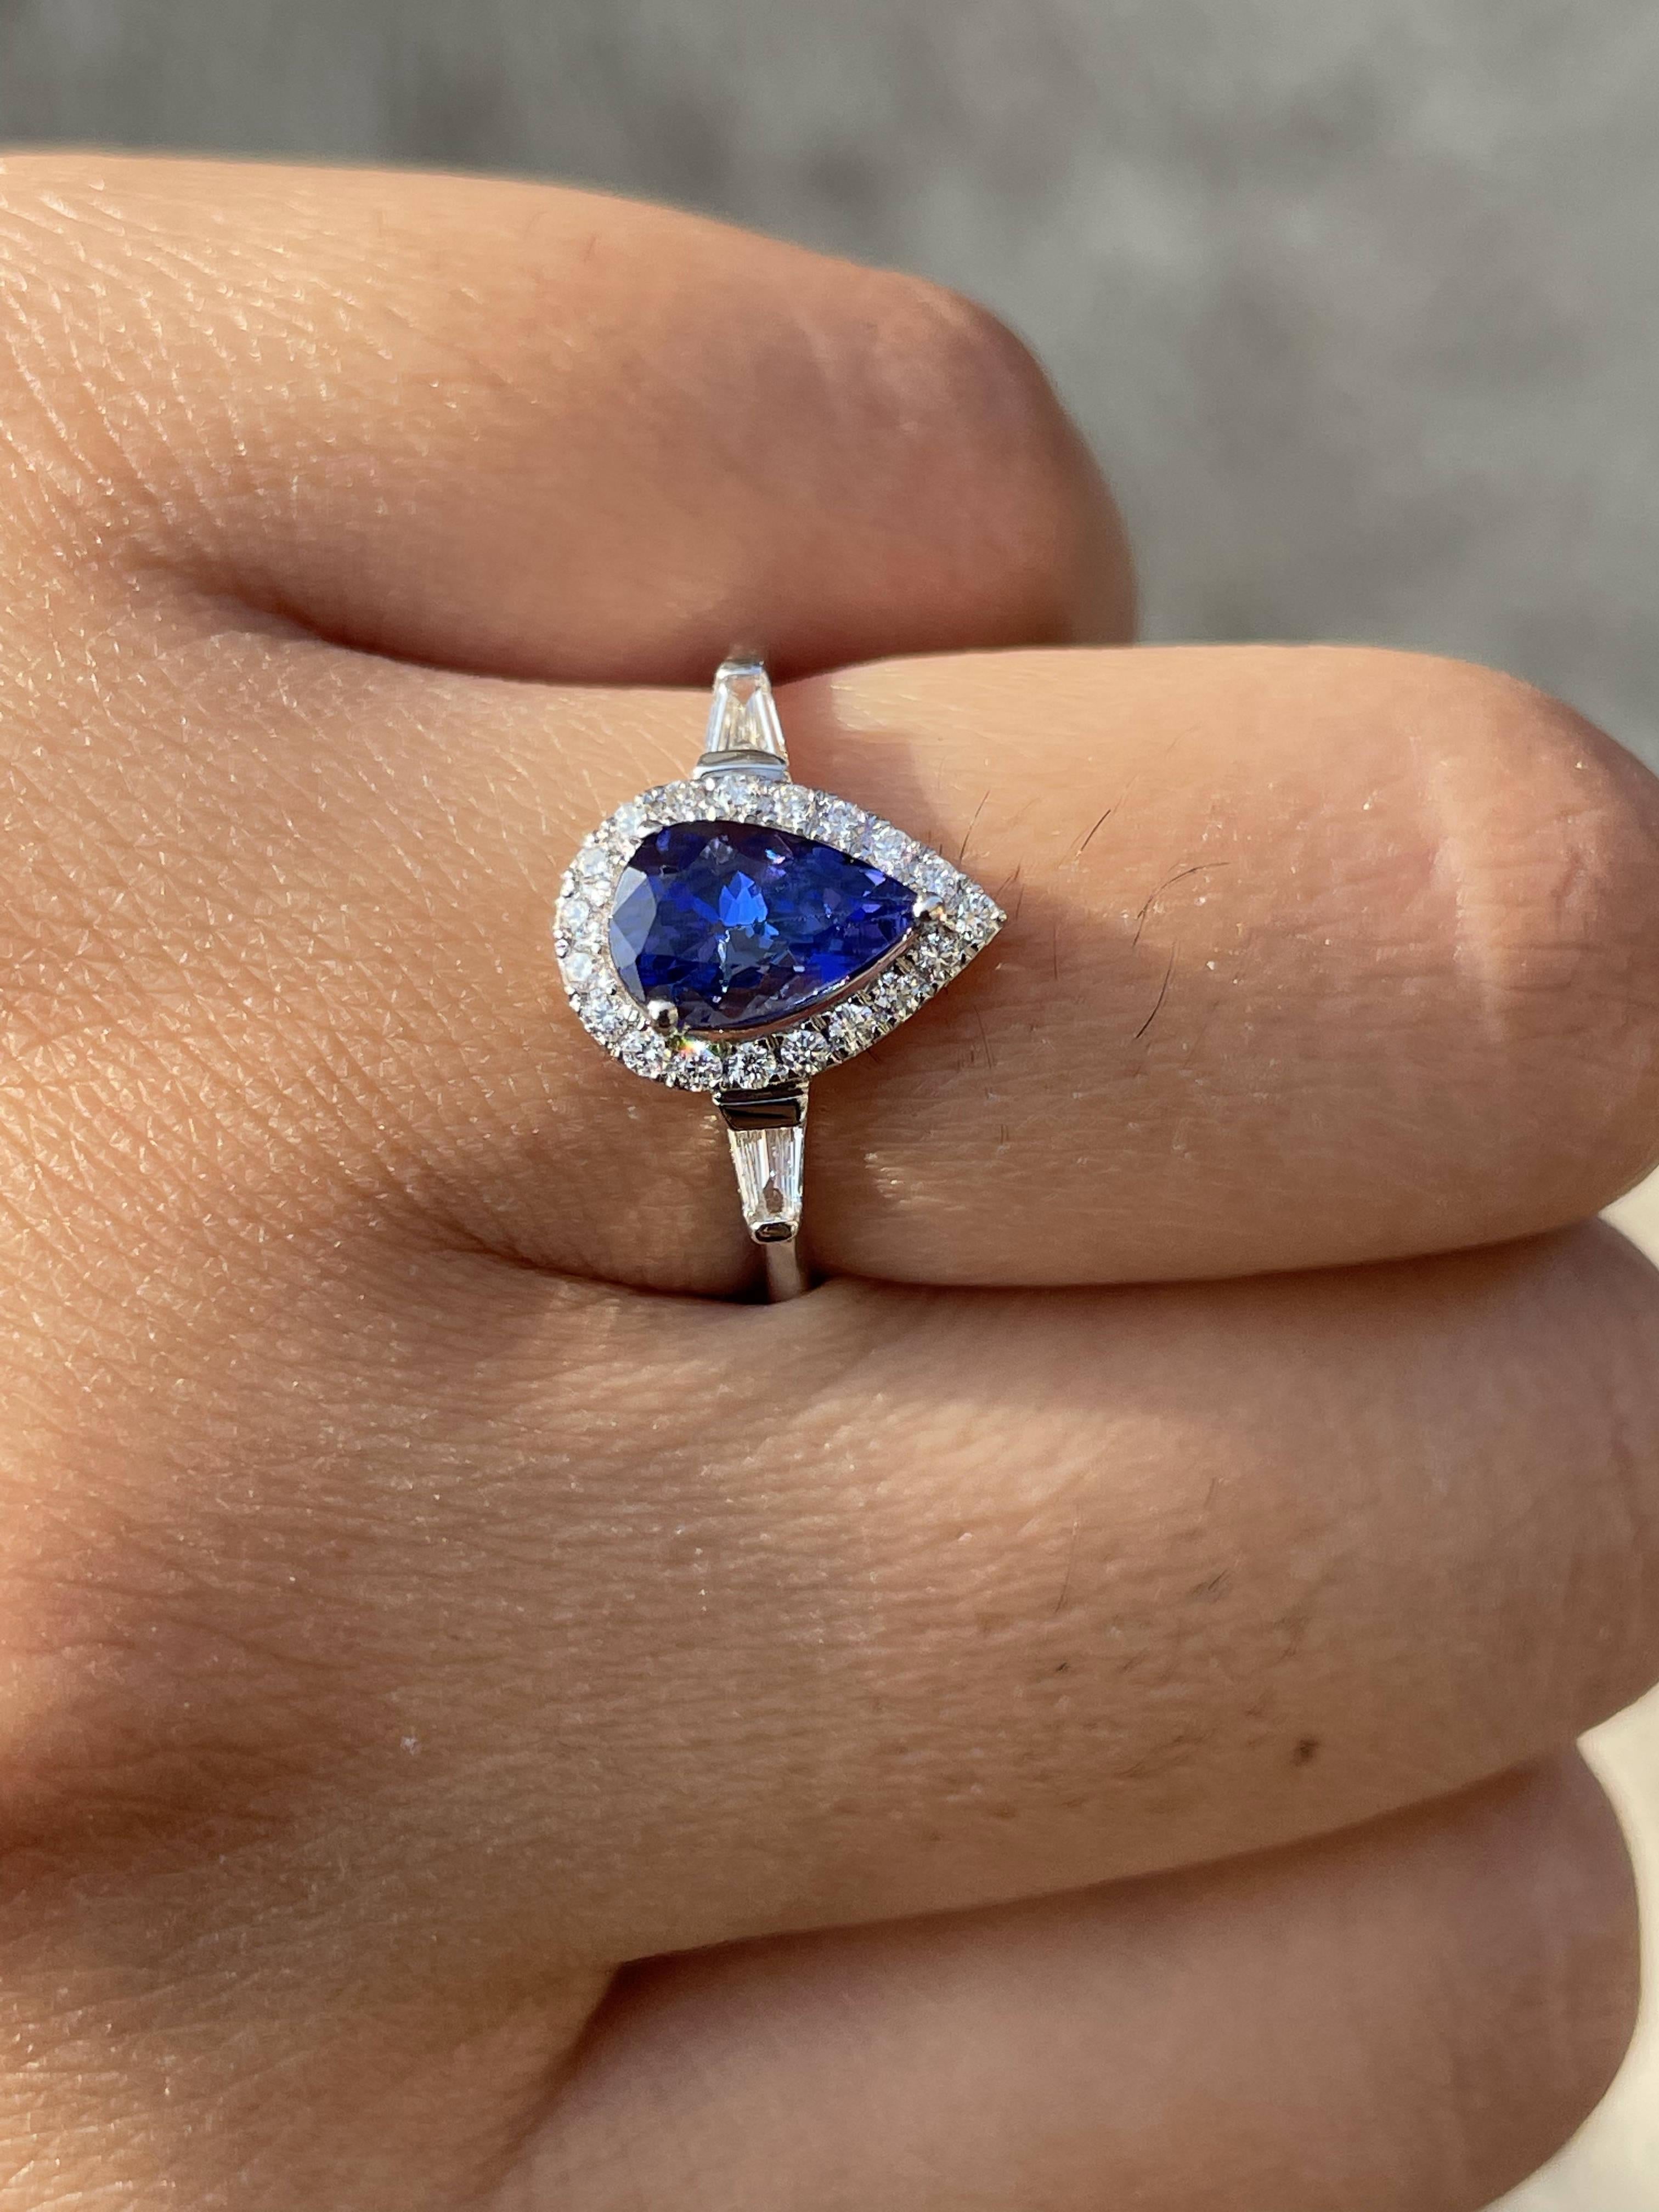 For Sale:  1.1 CTW Pear Shaped Tanzanite and Diamond Ring in 18k Solid White Gold 8